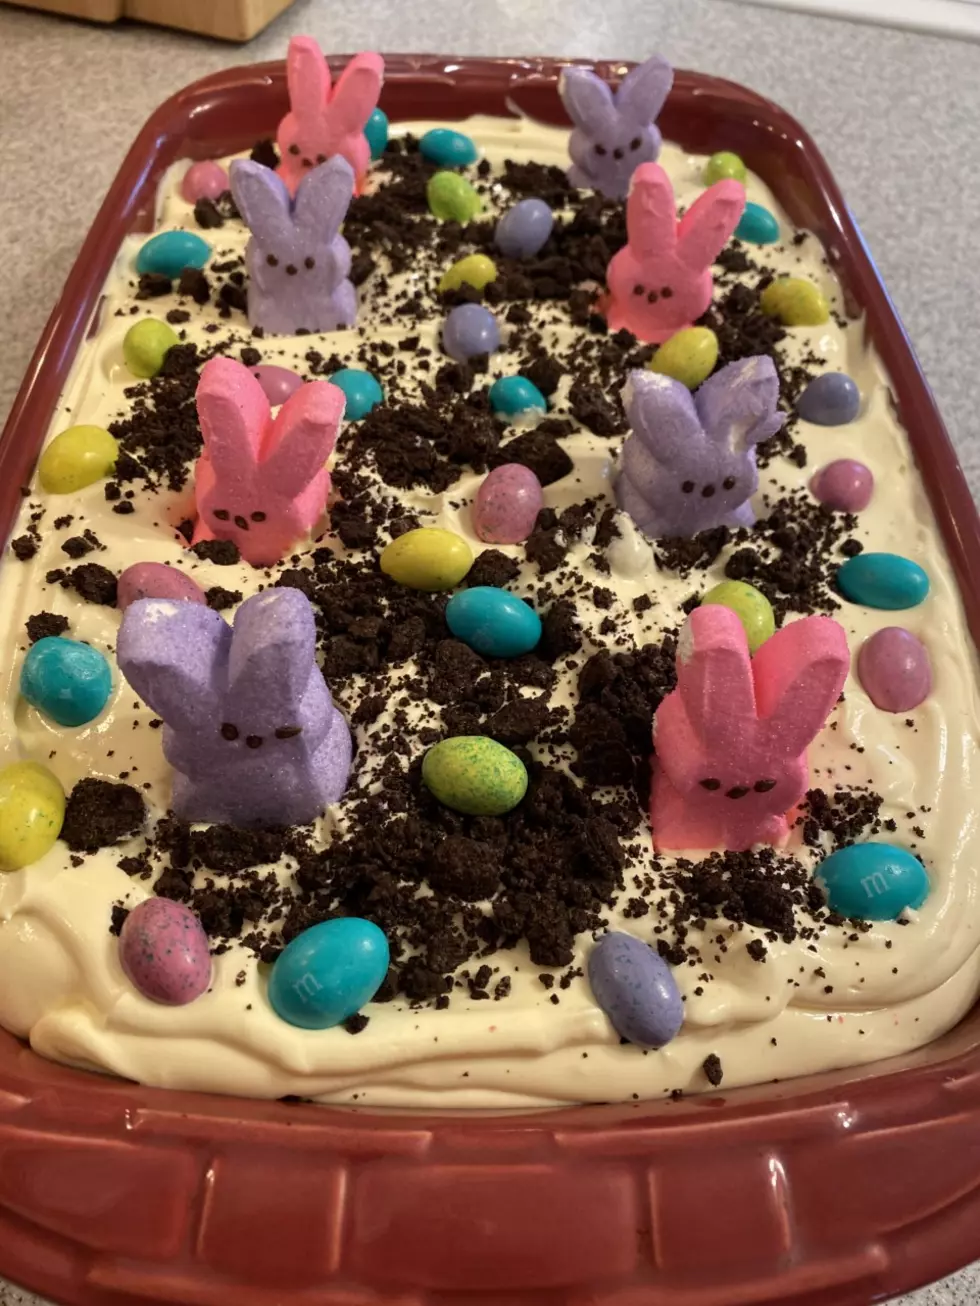 How to Make an Easter Dirt Cake